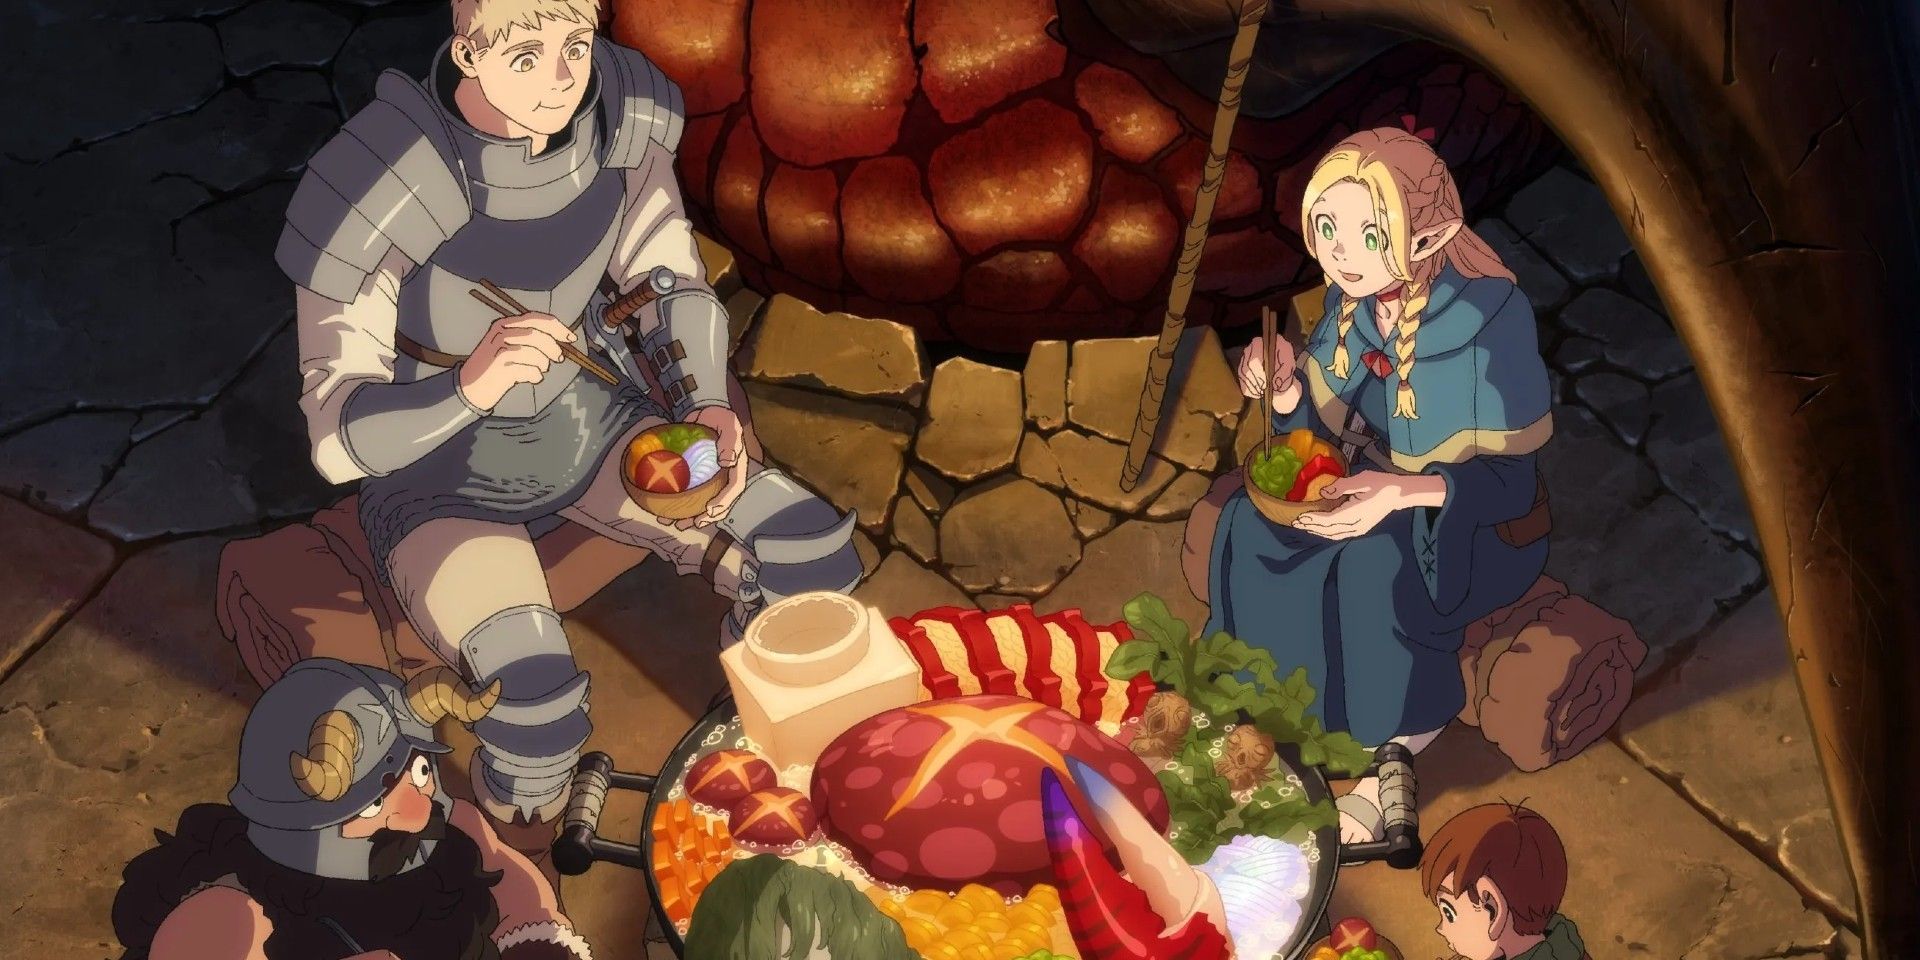 Delicious in Dungeon cast eating a delicious dinner in official artwork.